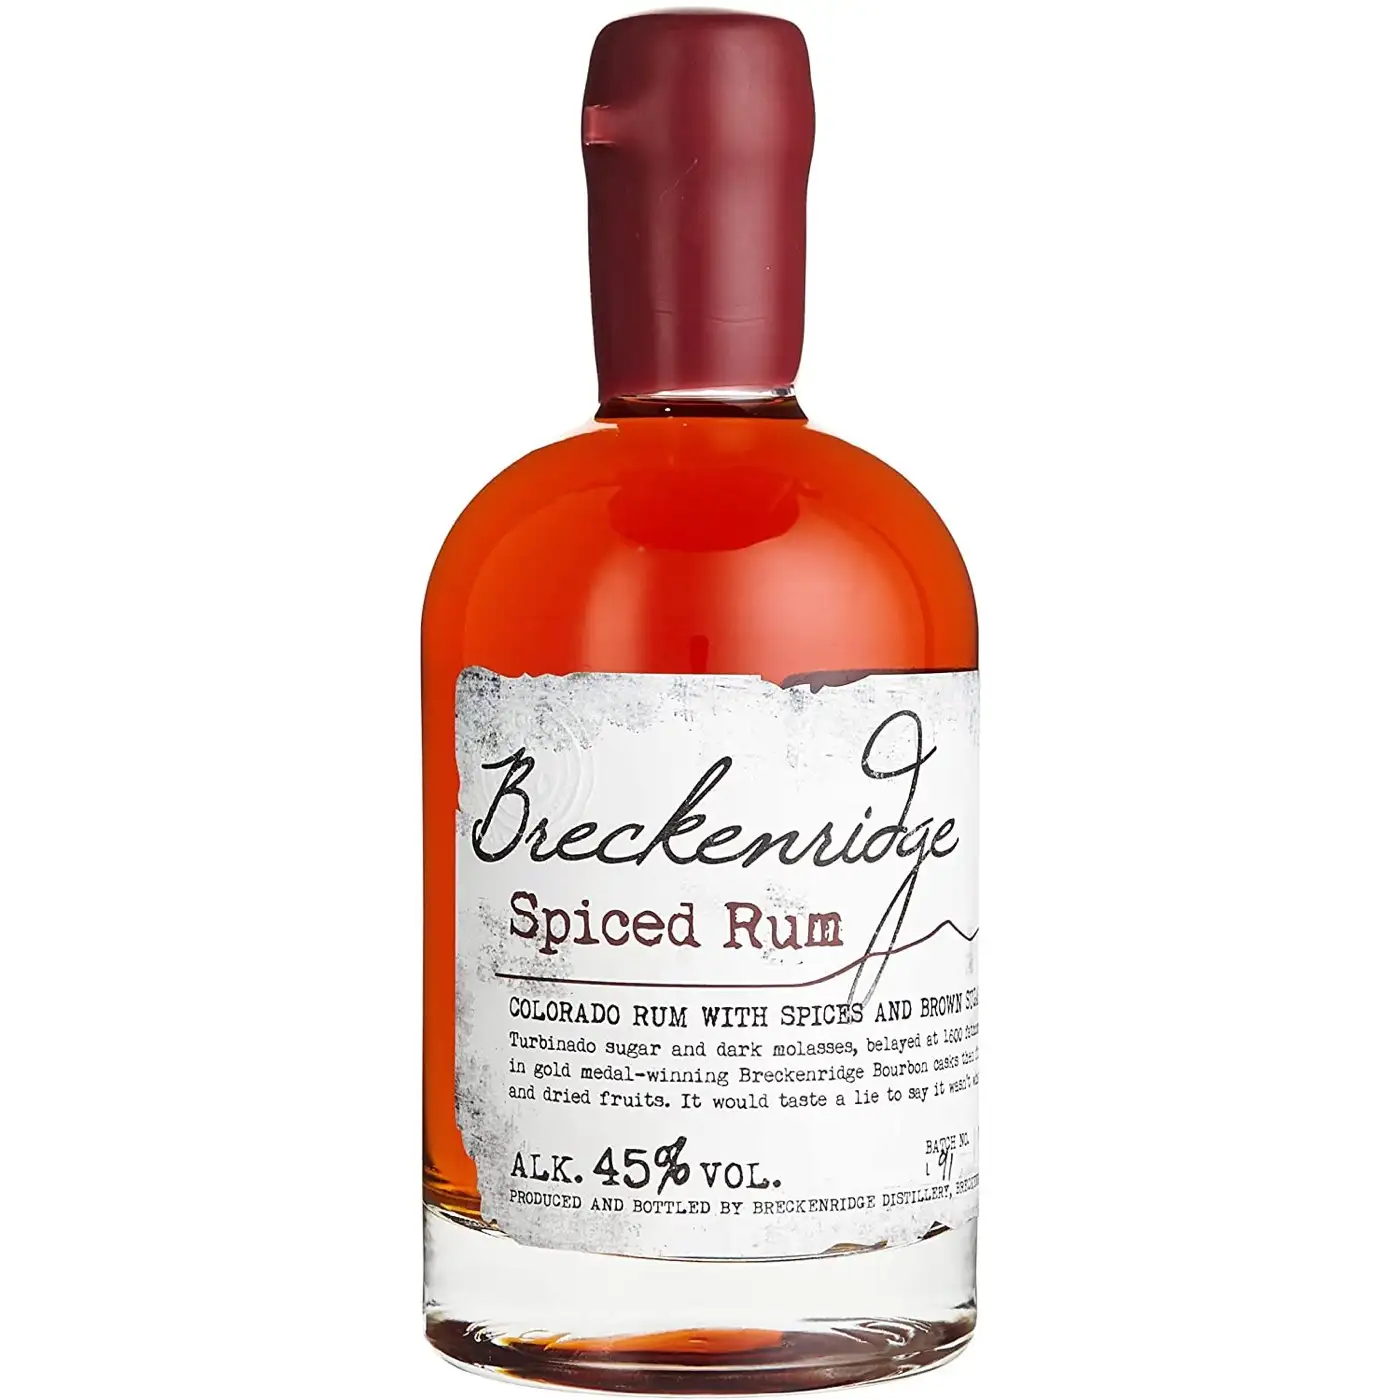 Image of the front of the bottle of the rum Breckenridge Spiced Rum